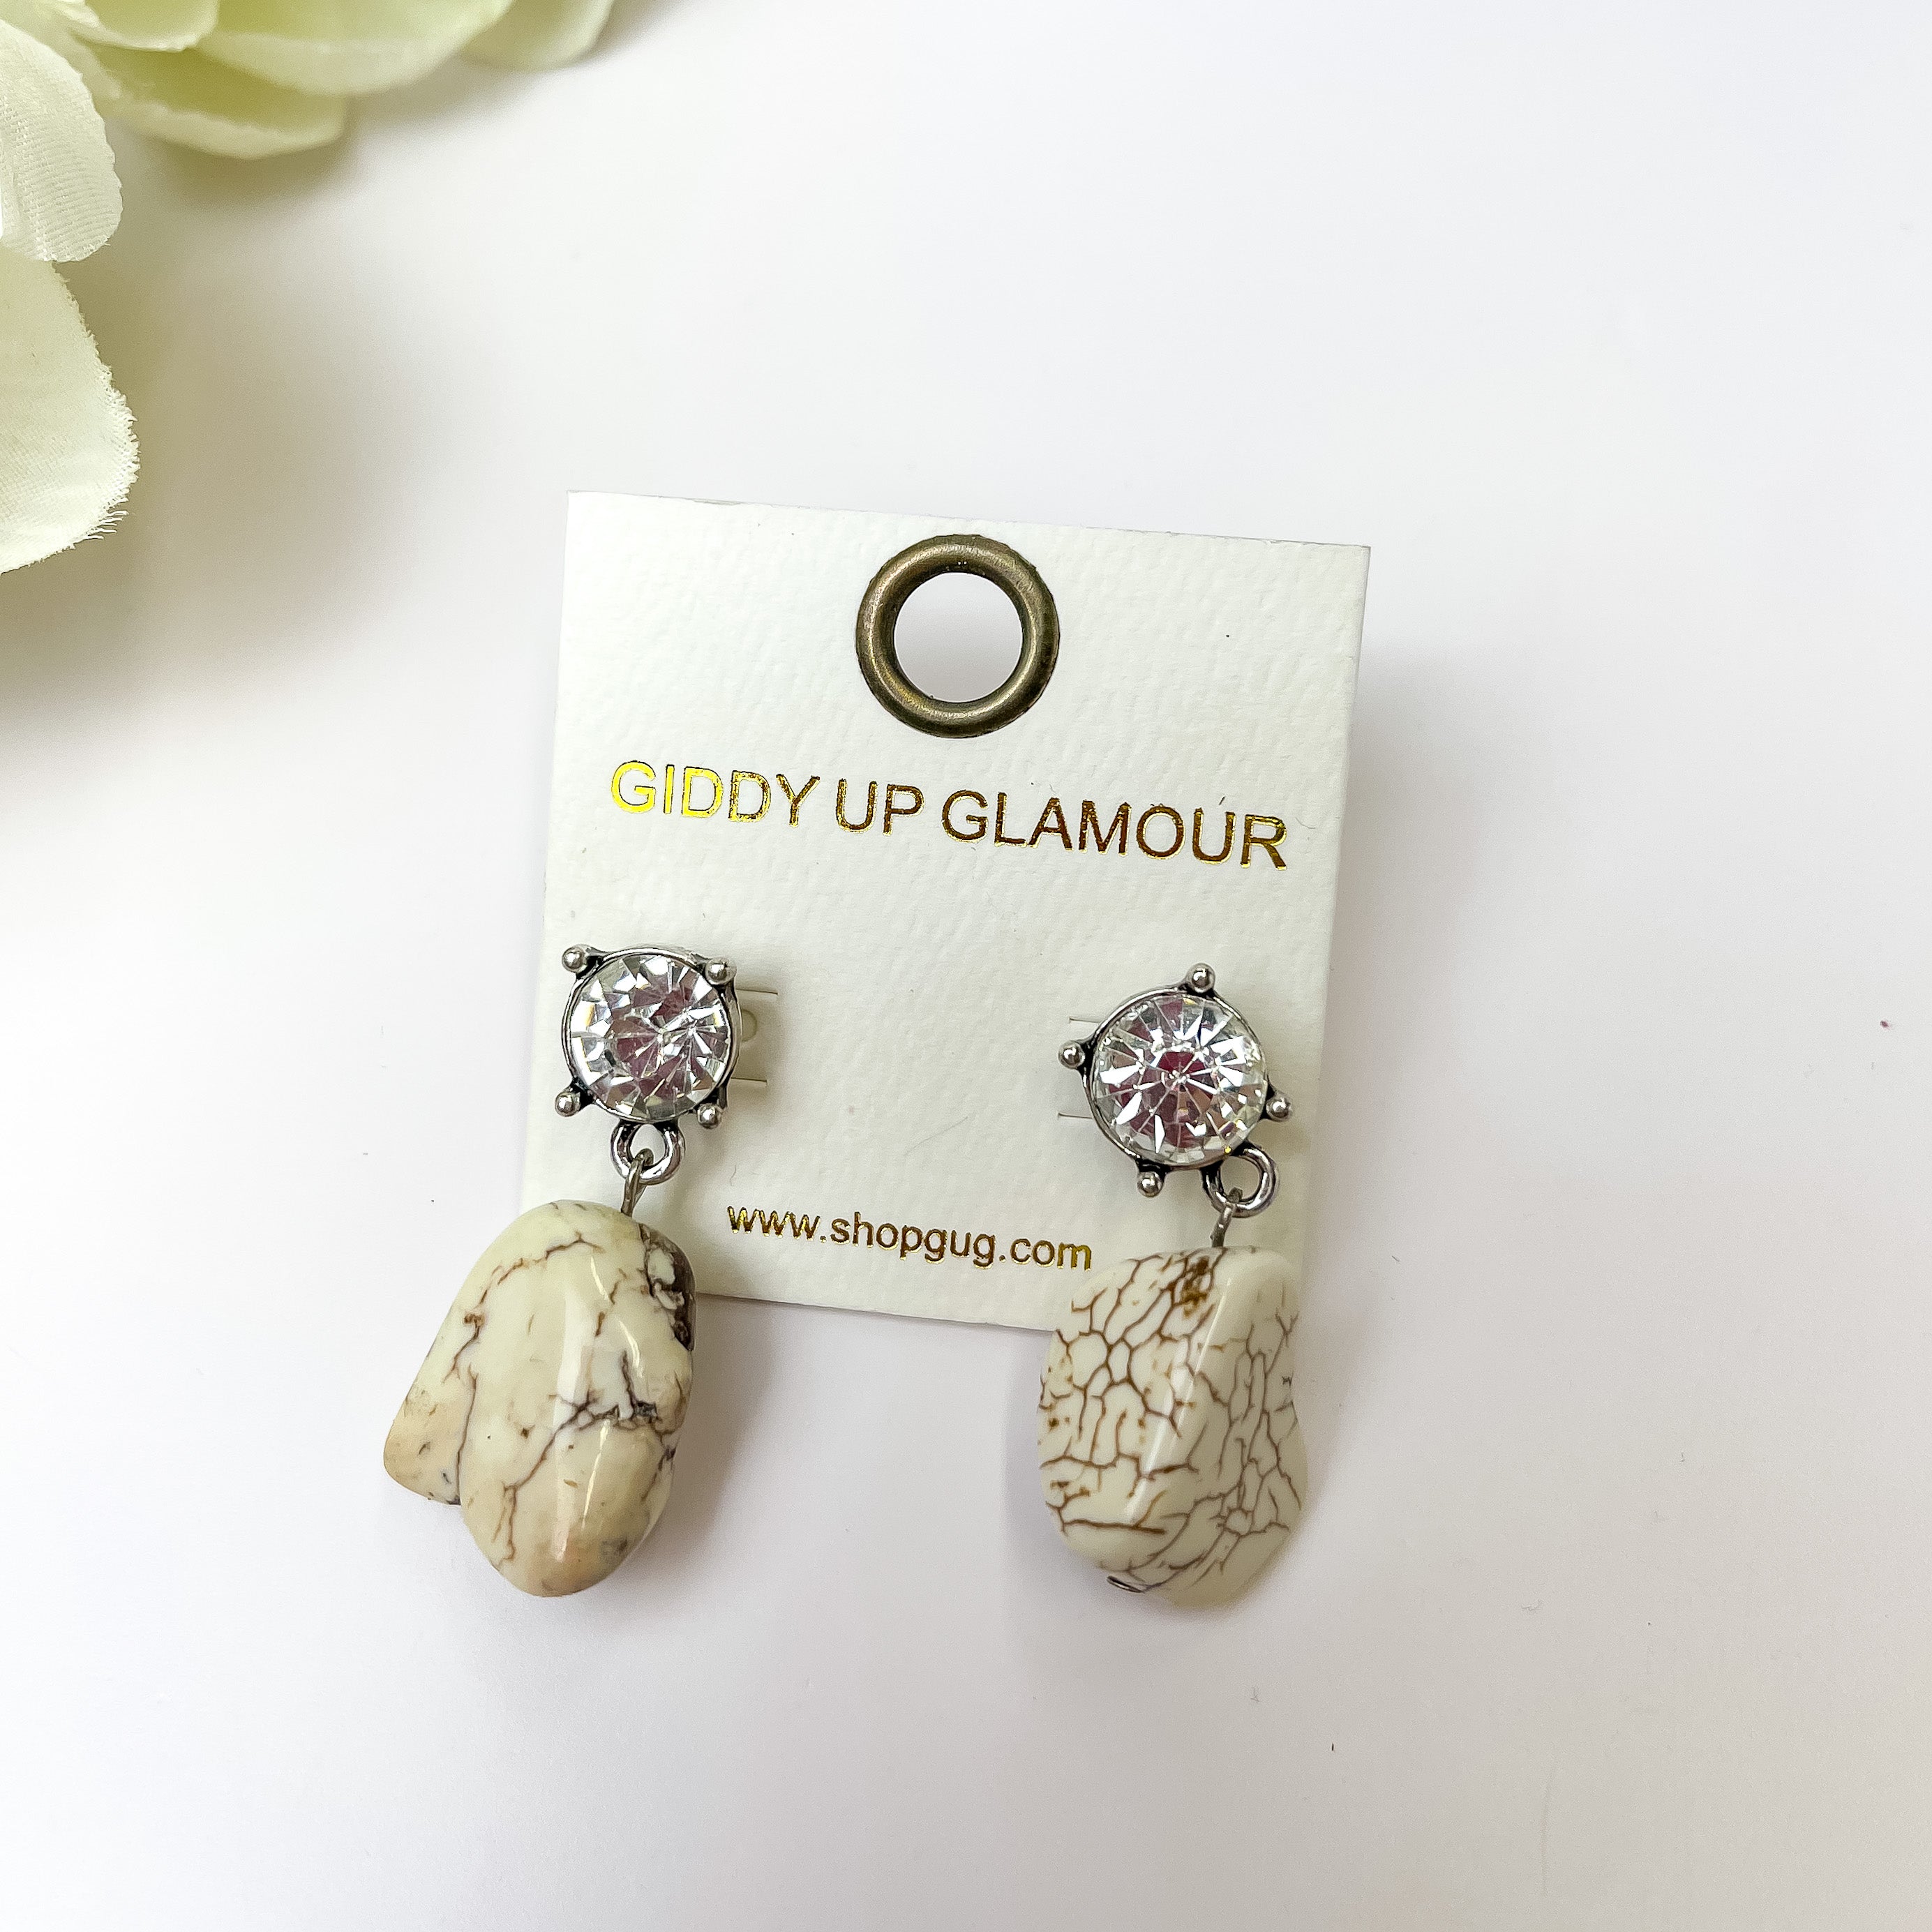 White Marbled Drop Earrings With Clear Crystal Studs. Pictured on a white bckground with a white flower in the top left corner. 